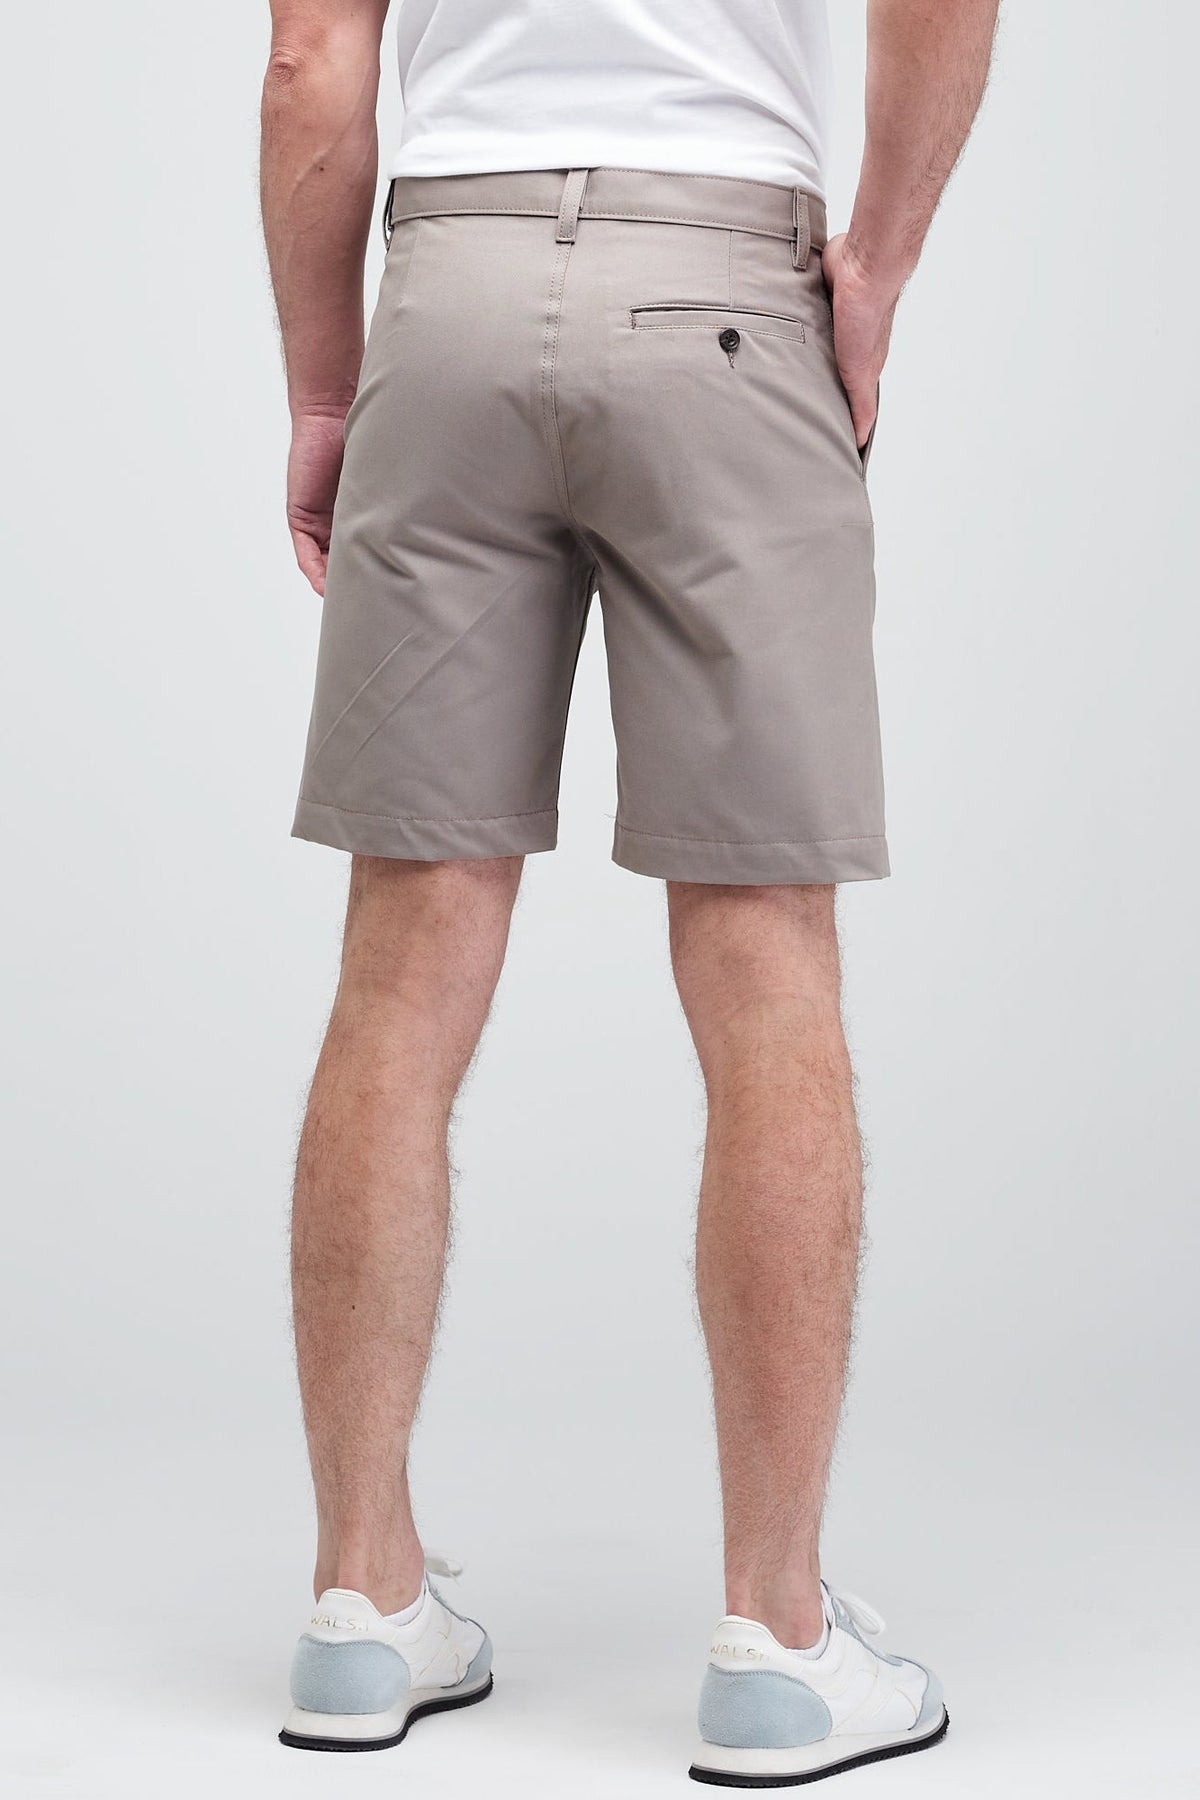 
            rear of white male in stone grey classic shorts